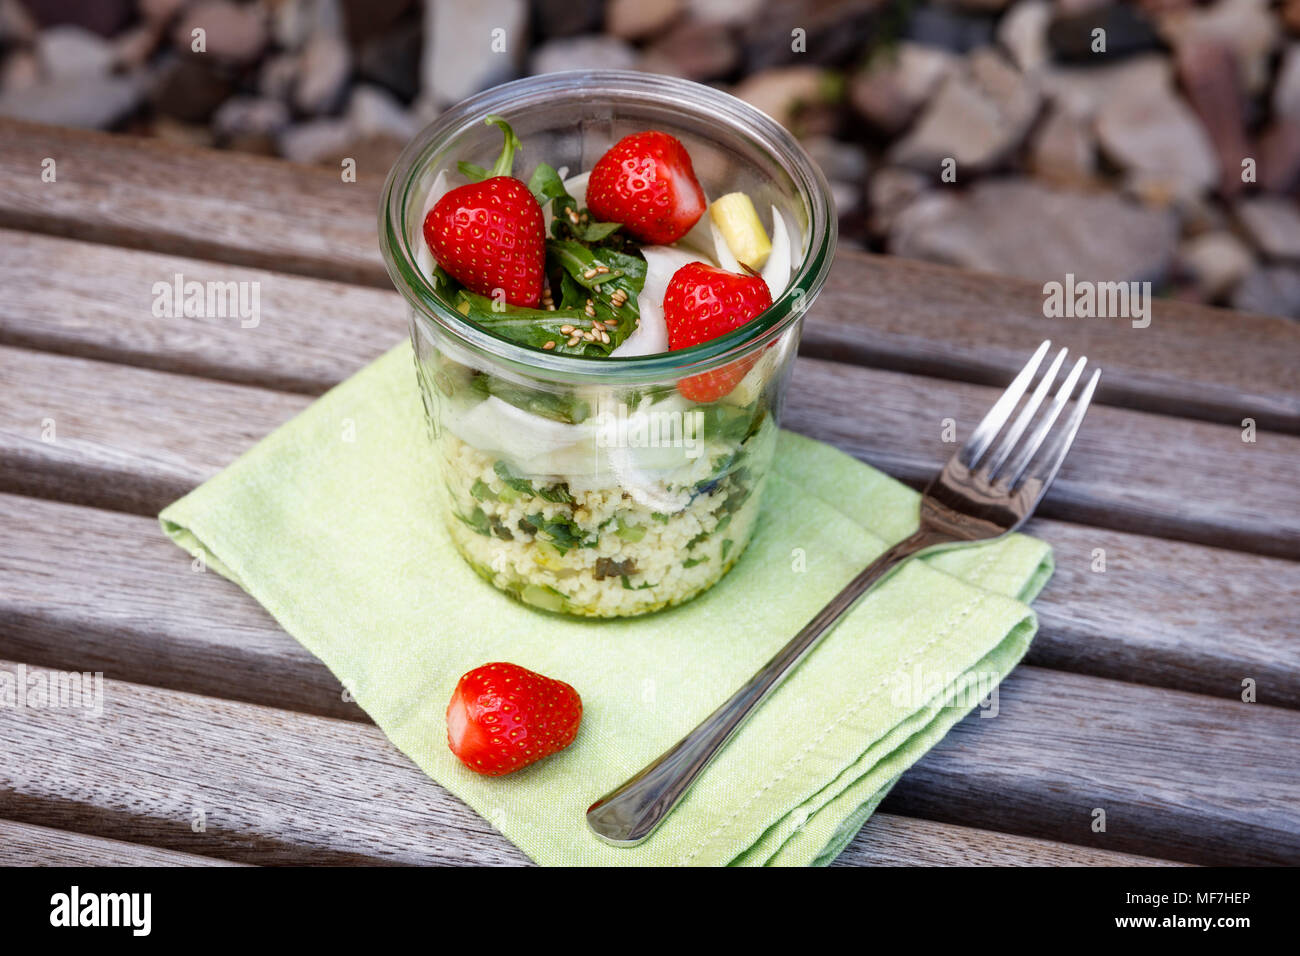 Asparagus salad with millet, strawberry, rocket in glass Stock Photo